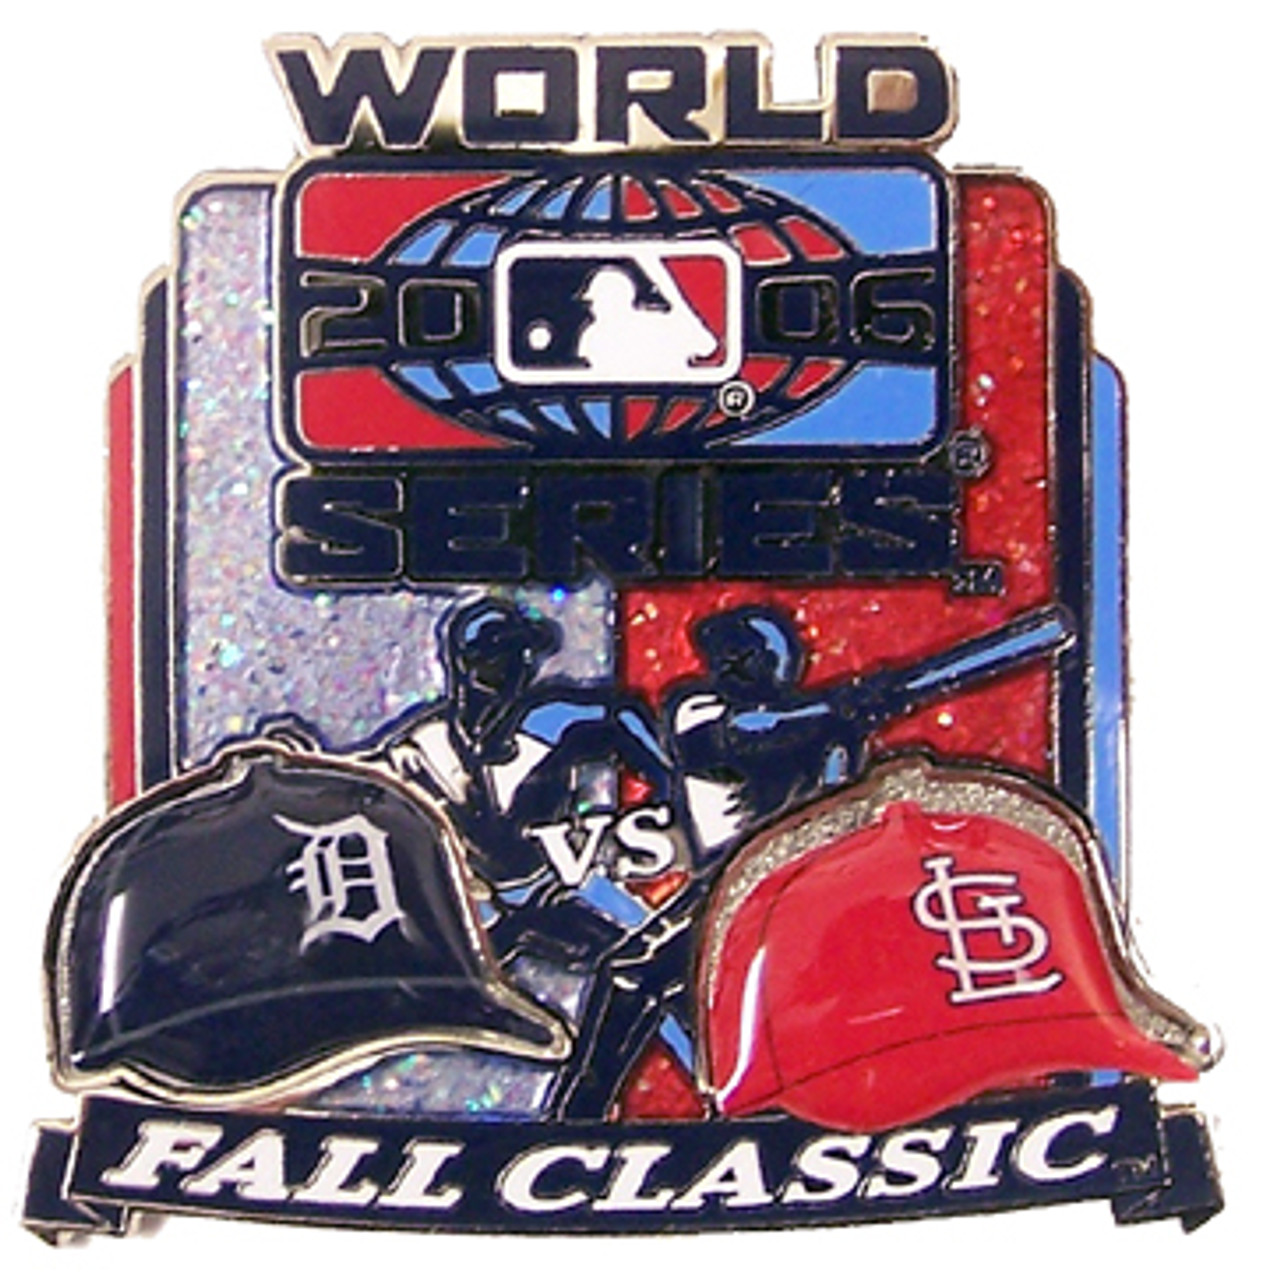 St. Louis Cardinals vs Tigers 2006 World Series Dueling Pin #3